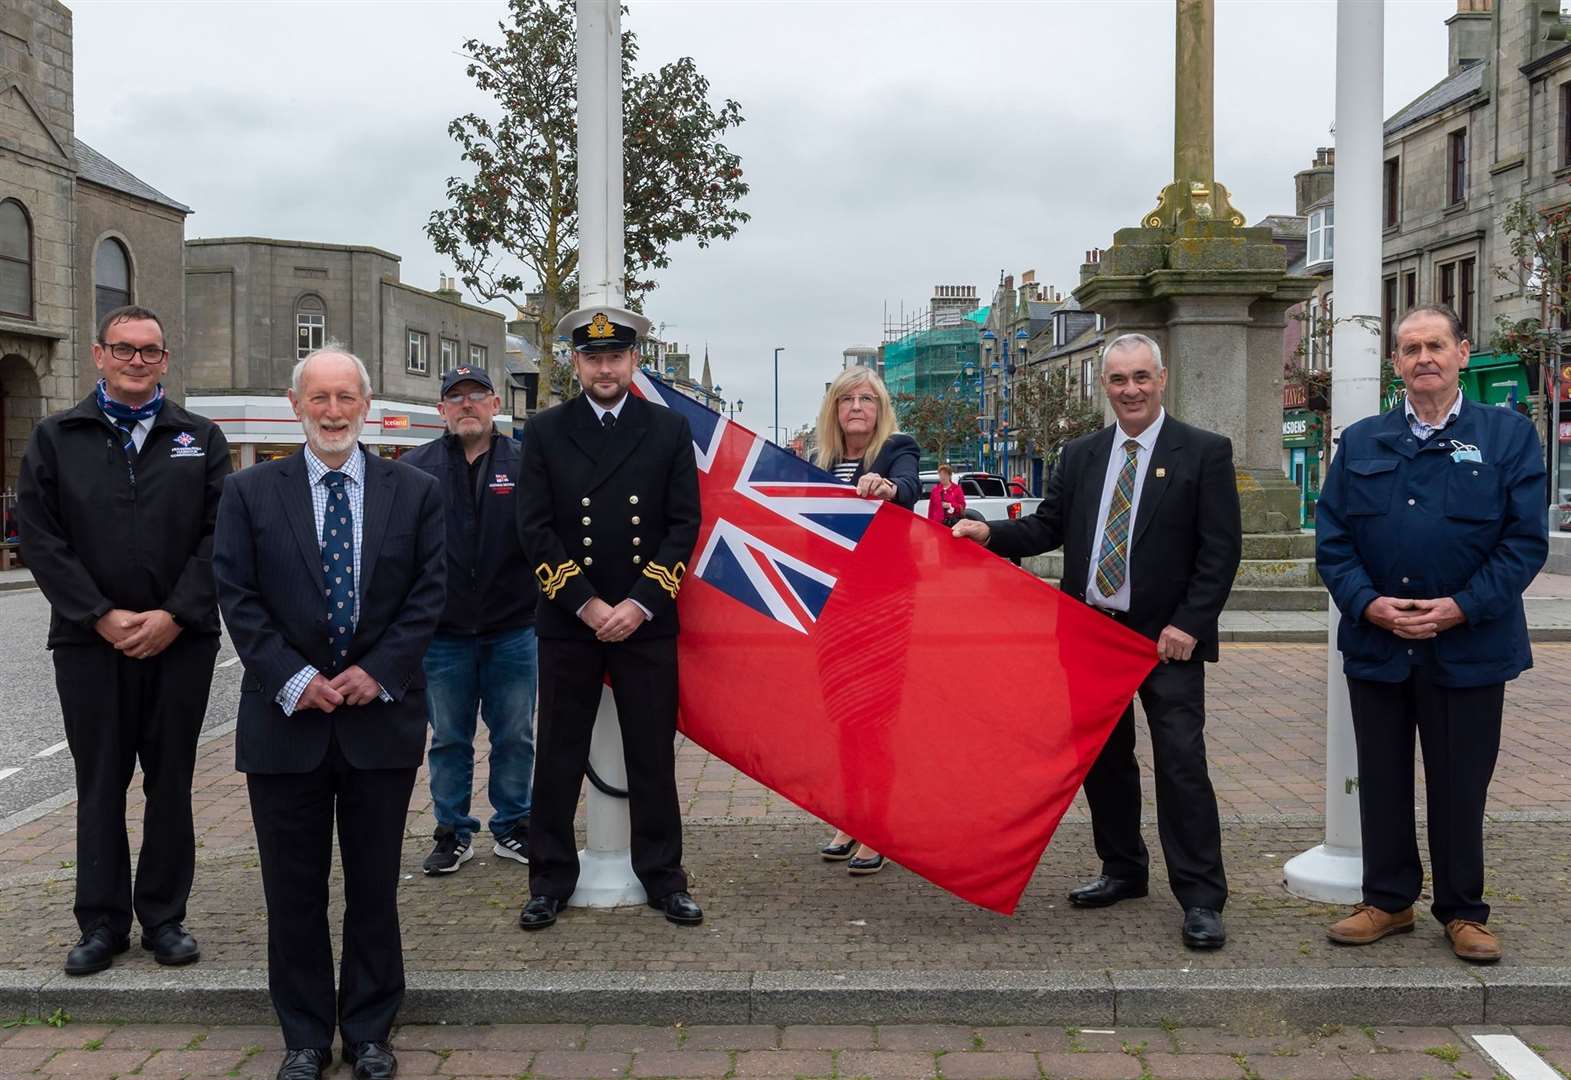 The Red Ensign was raised in Fraserburgh